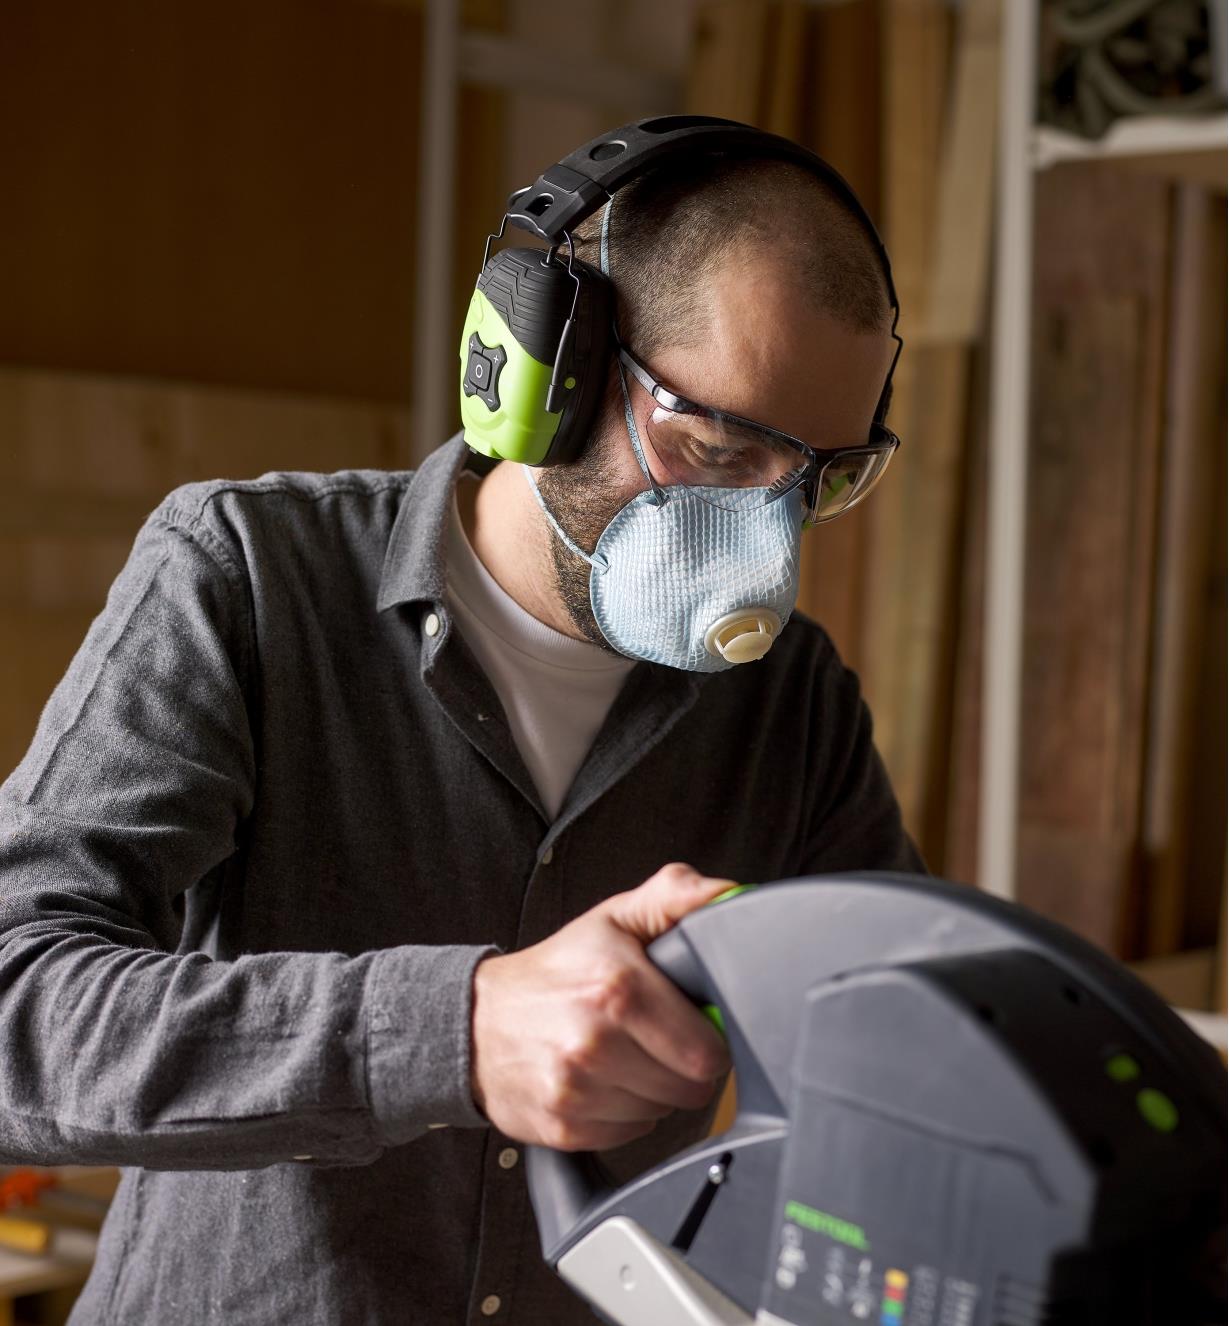 Operating a miter saw while wearing the ISOTunes LINK Aware earmuff hearing protectors